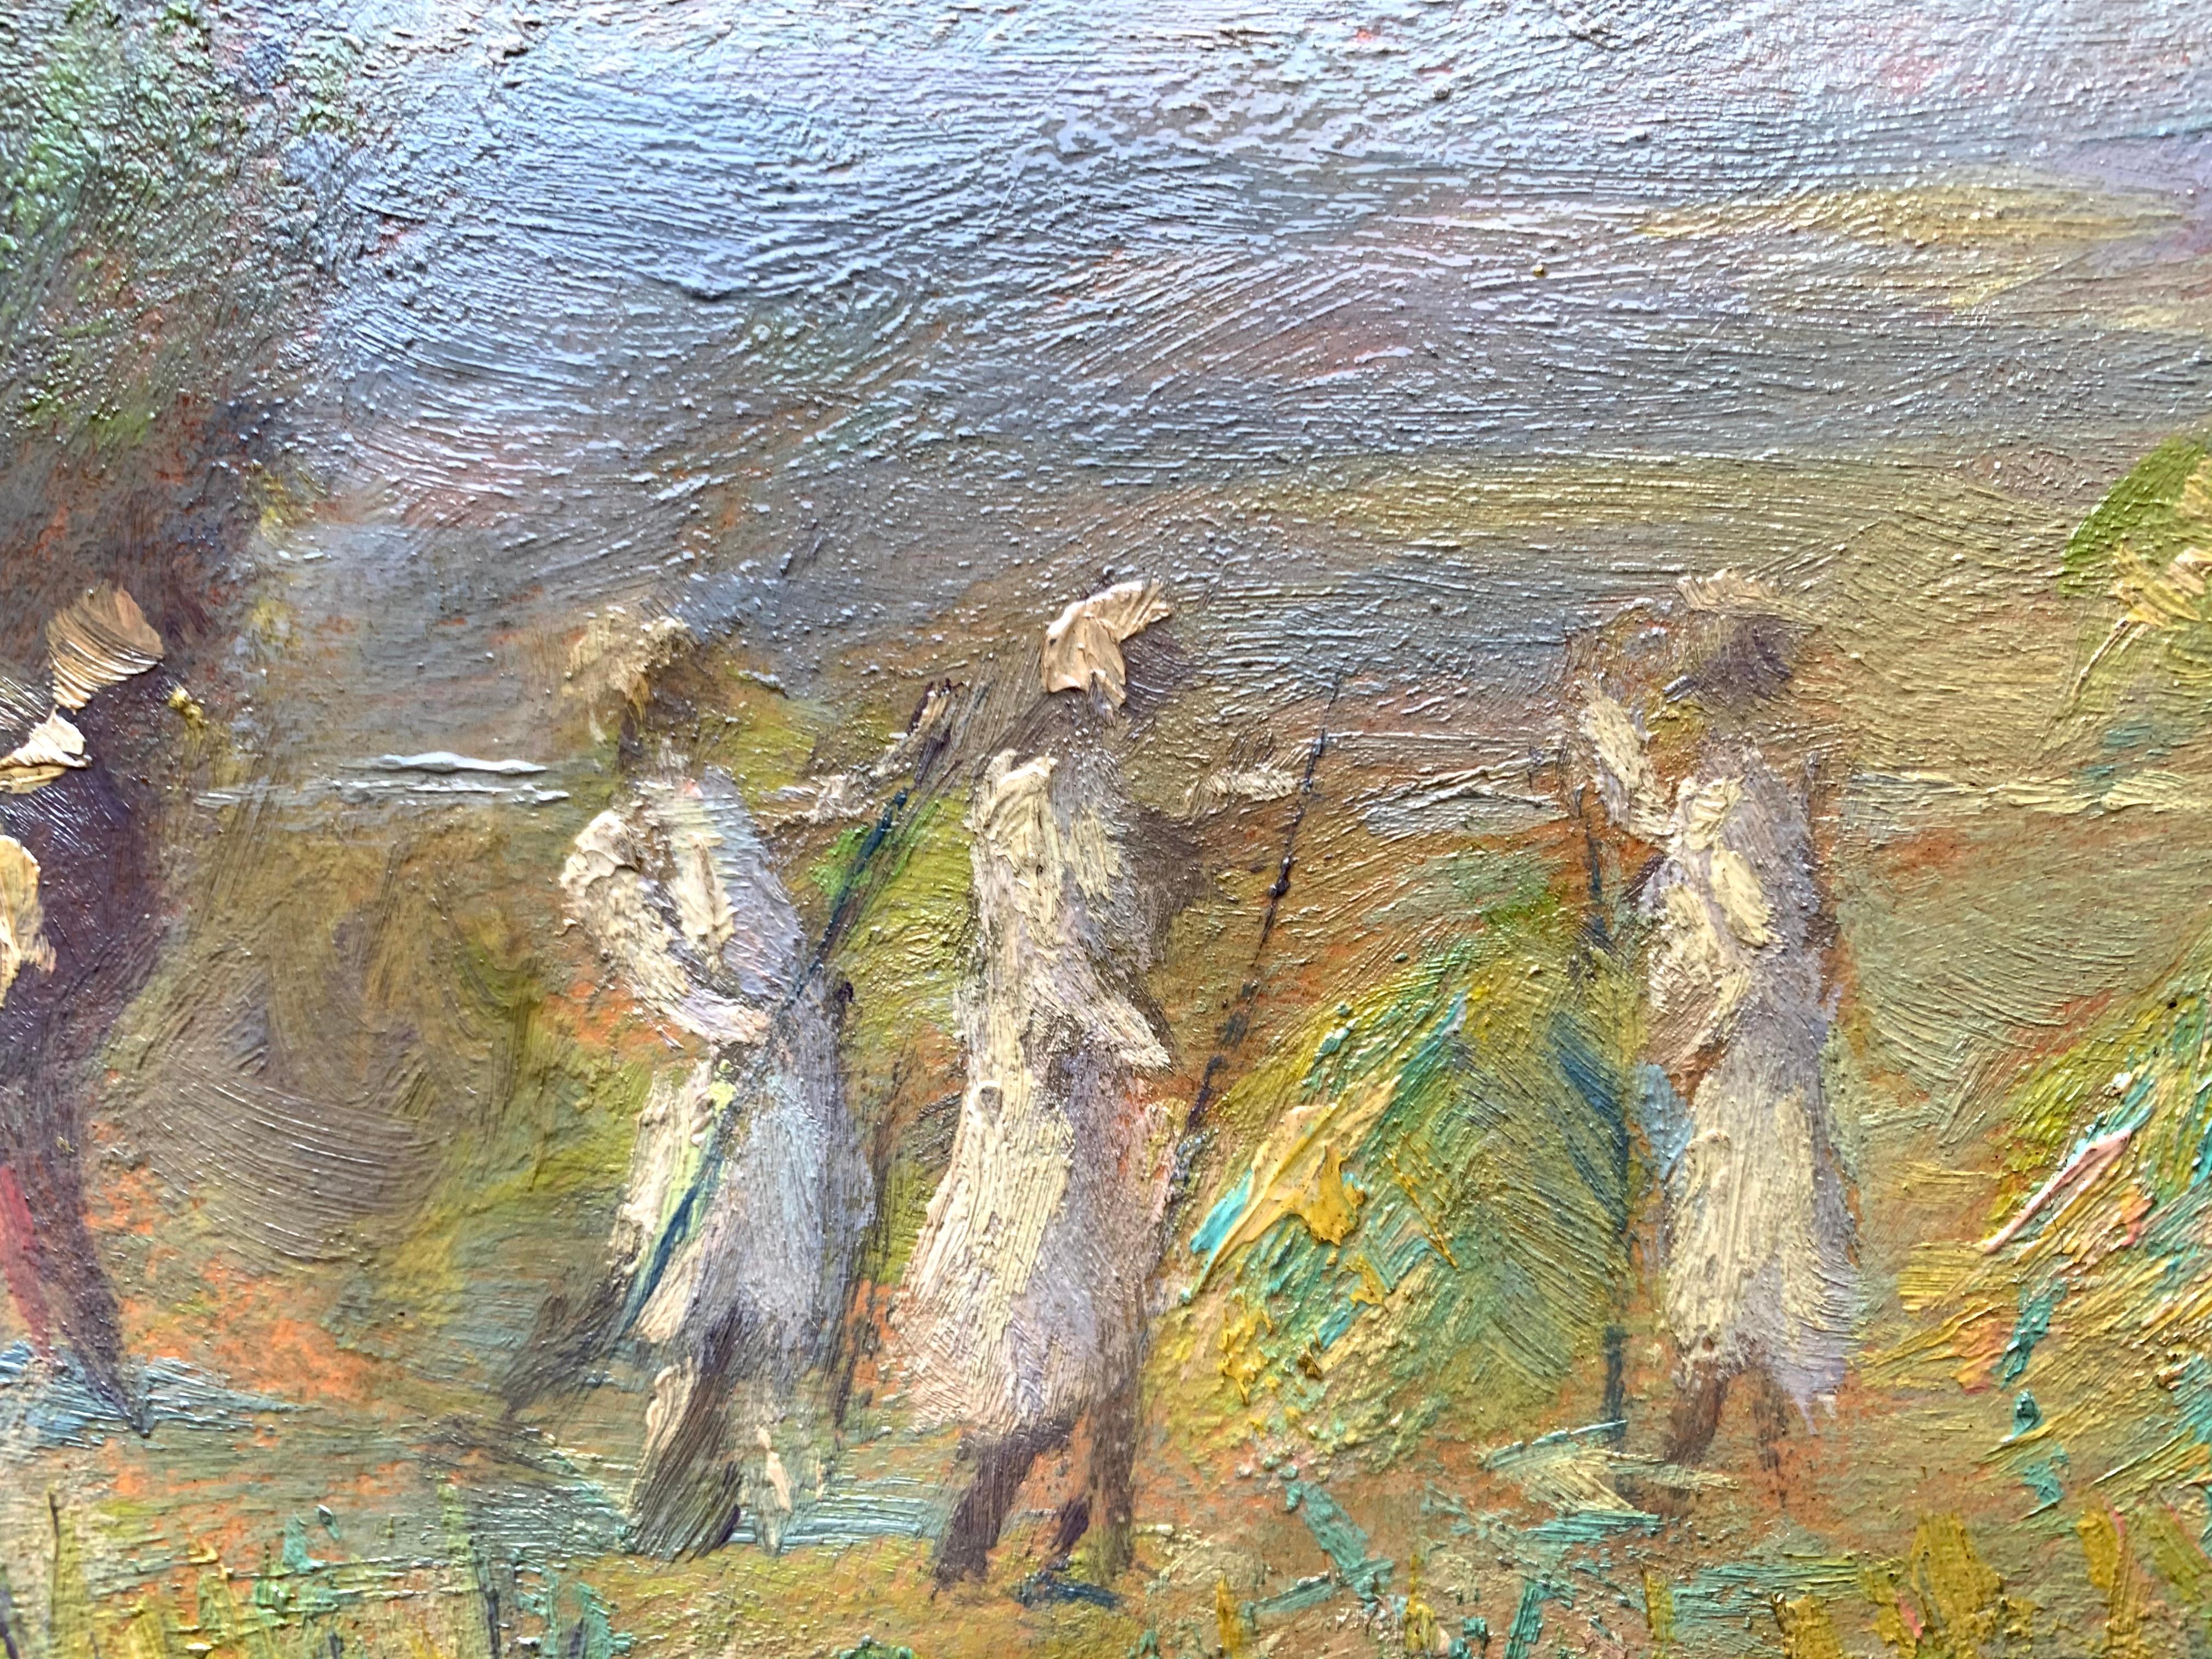 *Special discount, only for a limited time

Wonderful and vibrant French impressionist painting depicting a hay harvest in the country side. Painted with swift and confident brush-strokes this work wonderfully captures the spirit of French